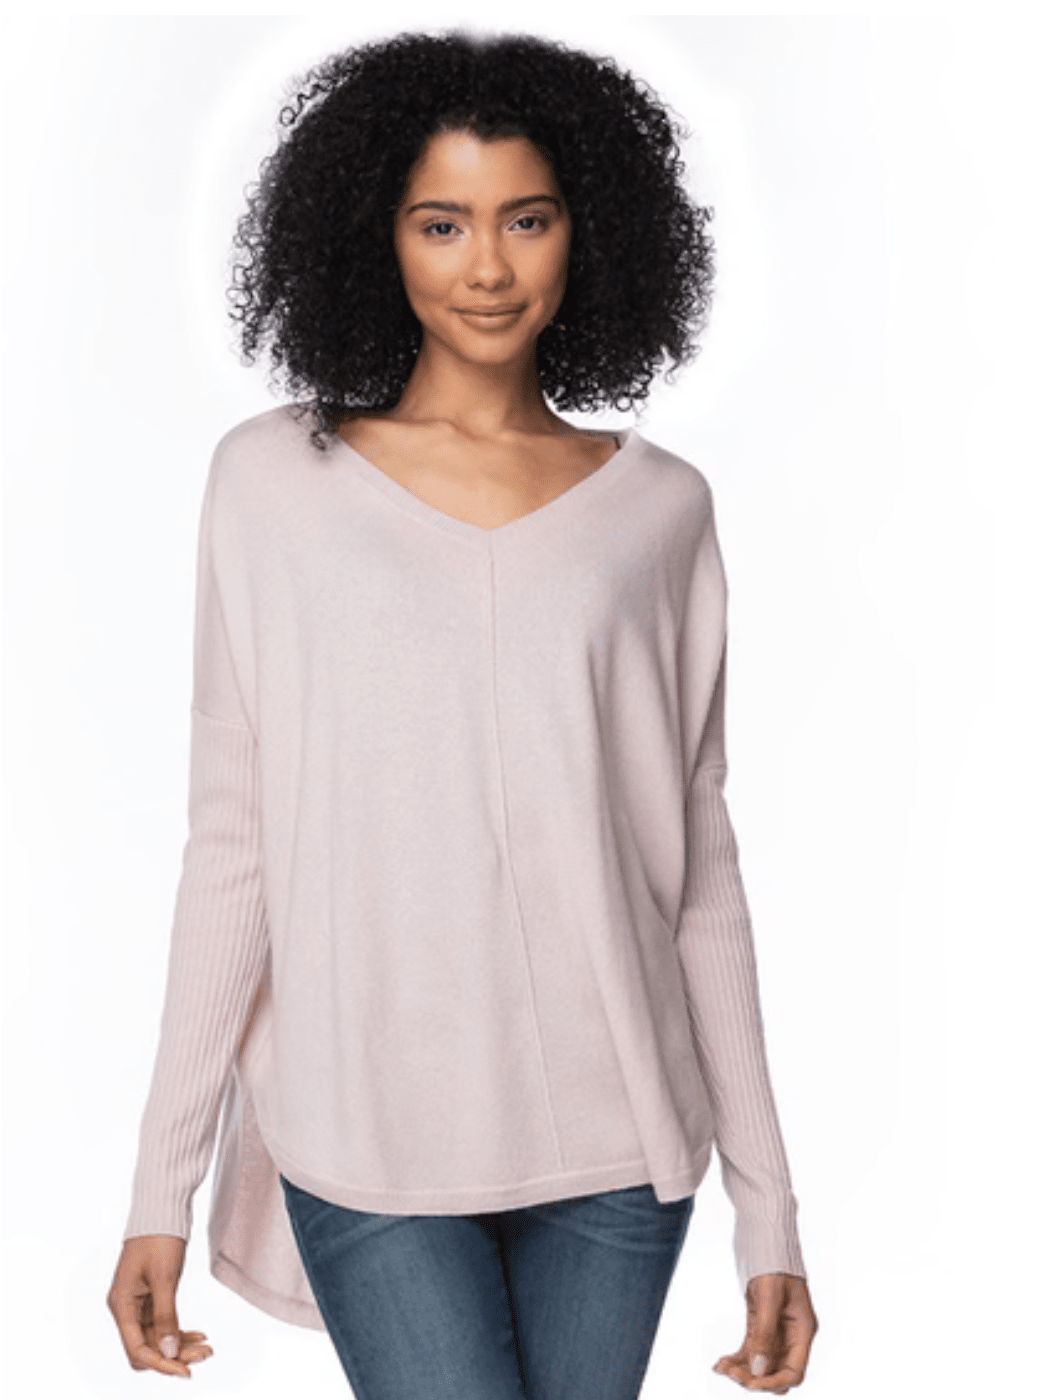 Washable Cashmere V-Neck Sweater Tops MOM fave Dusty XS/S 